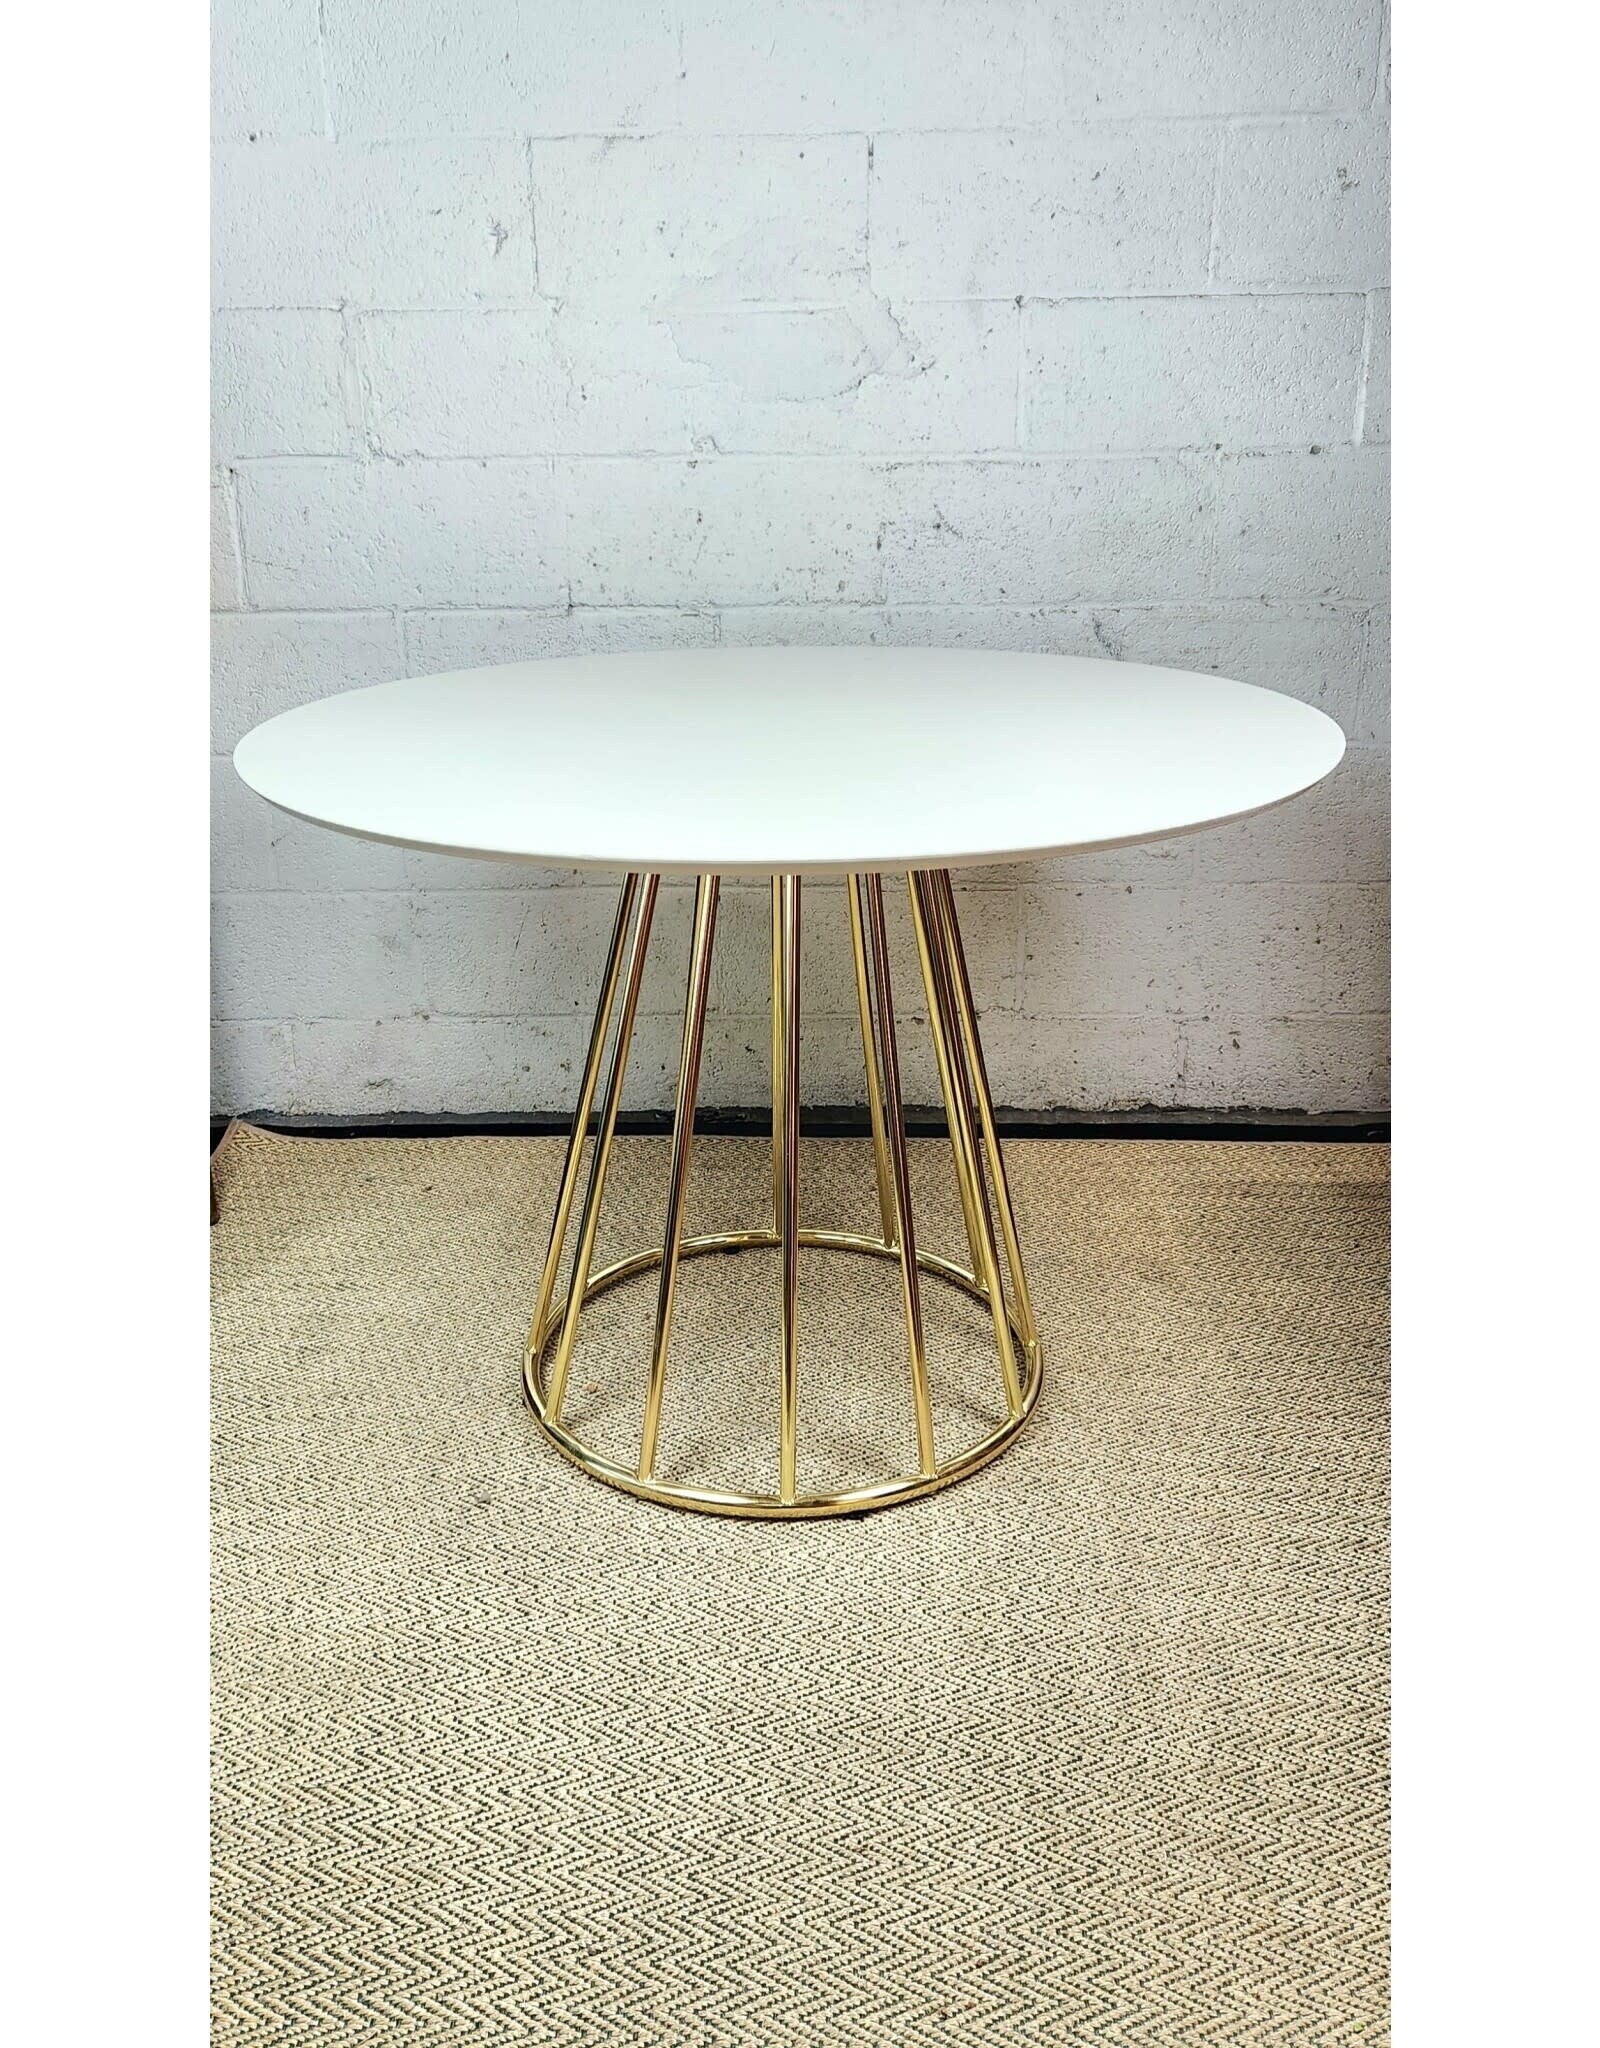 Target White Circular Table with Golden Base Brooklyn